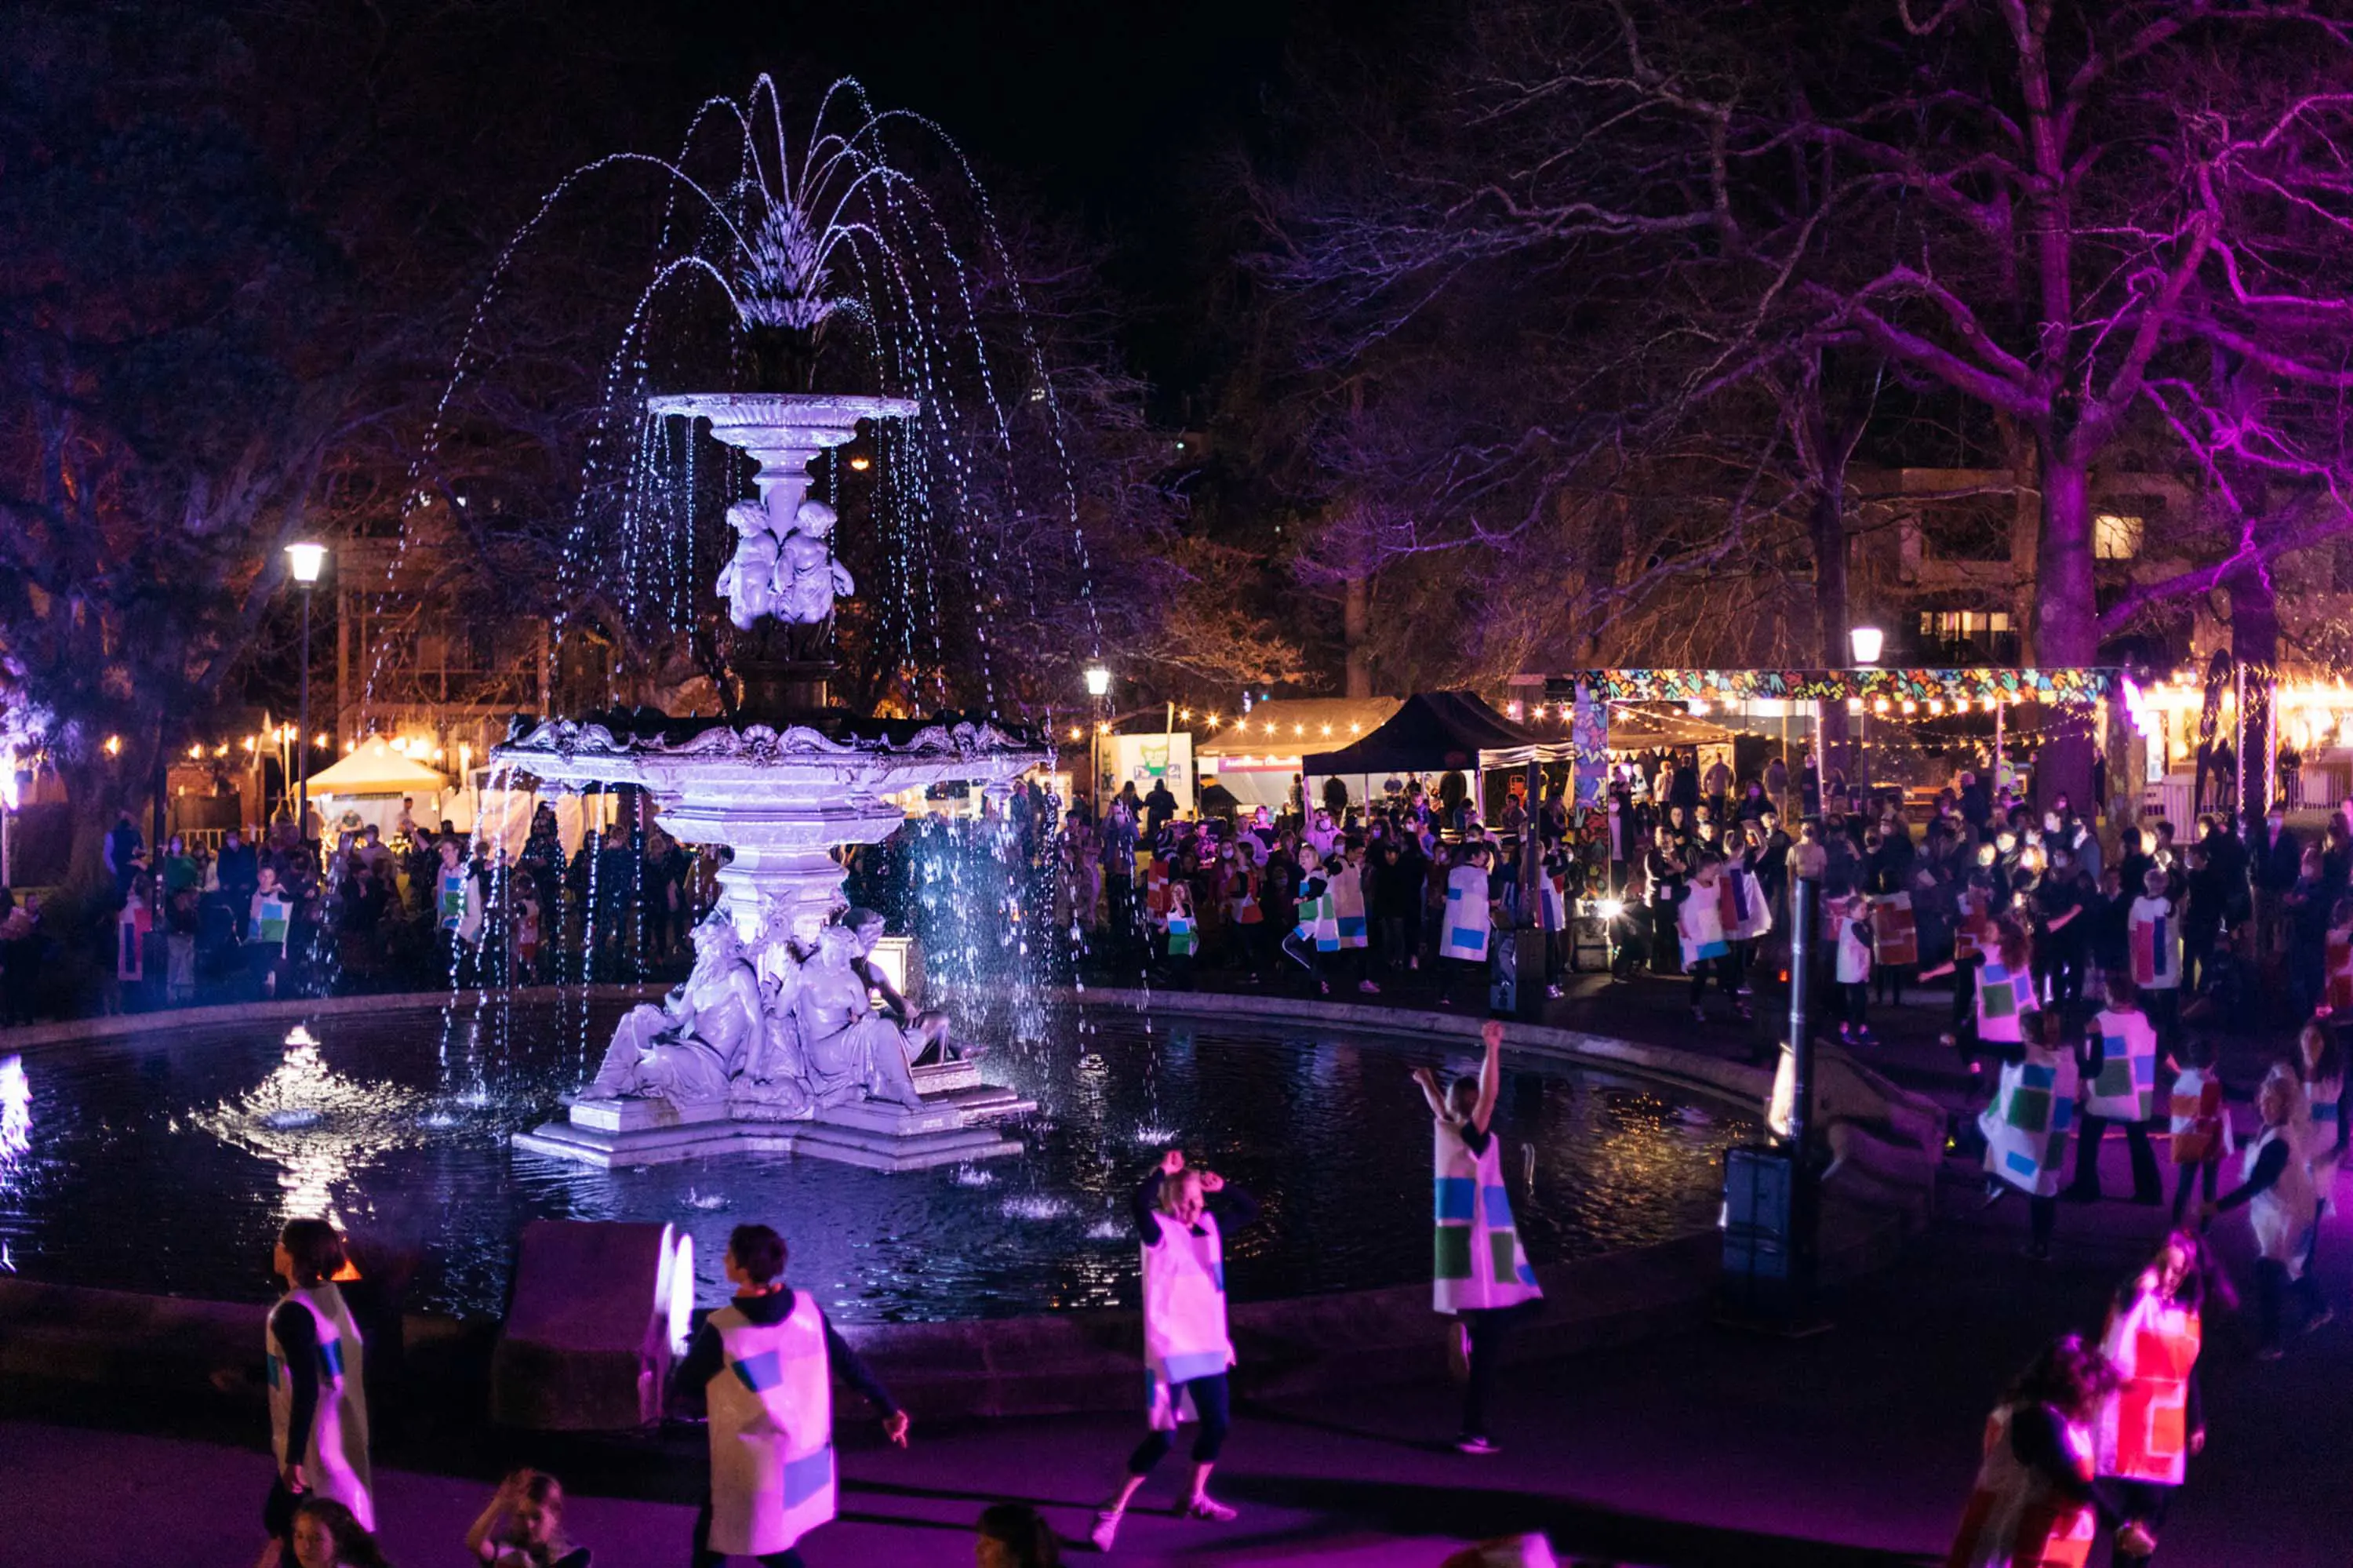 People enjoy a night festival with stalls and lights with a large fountain at its centre.